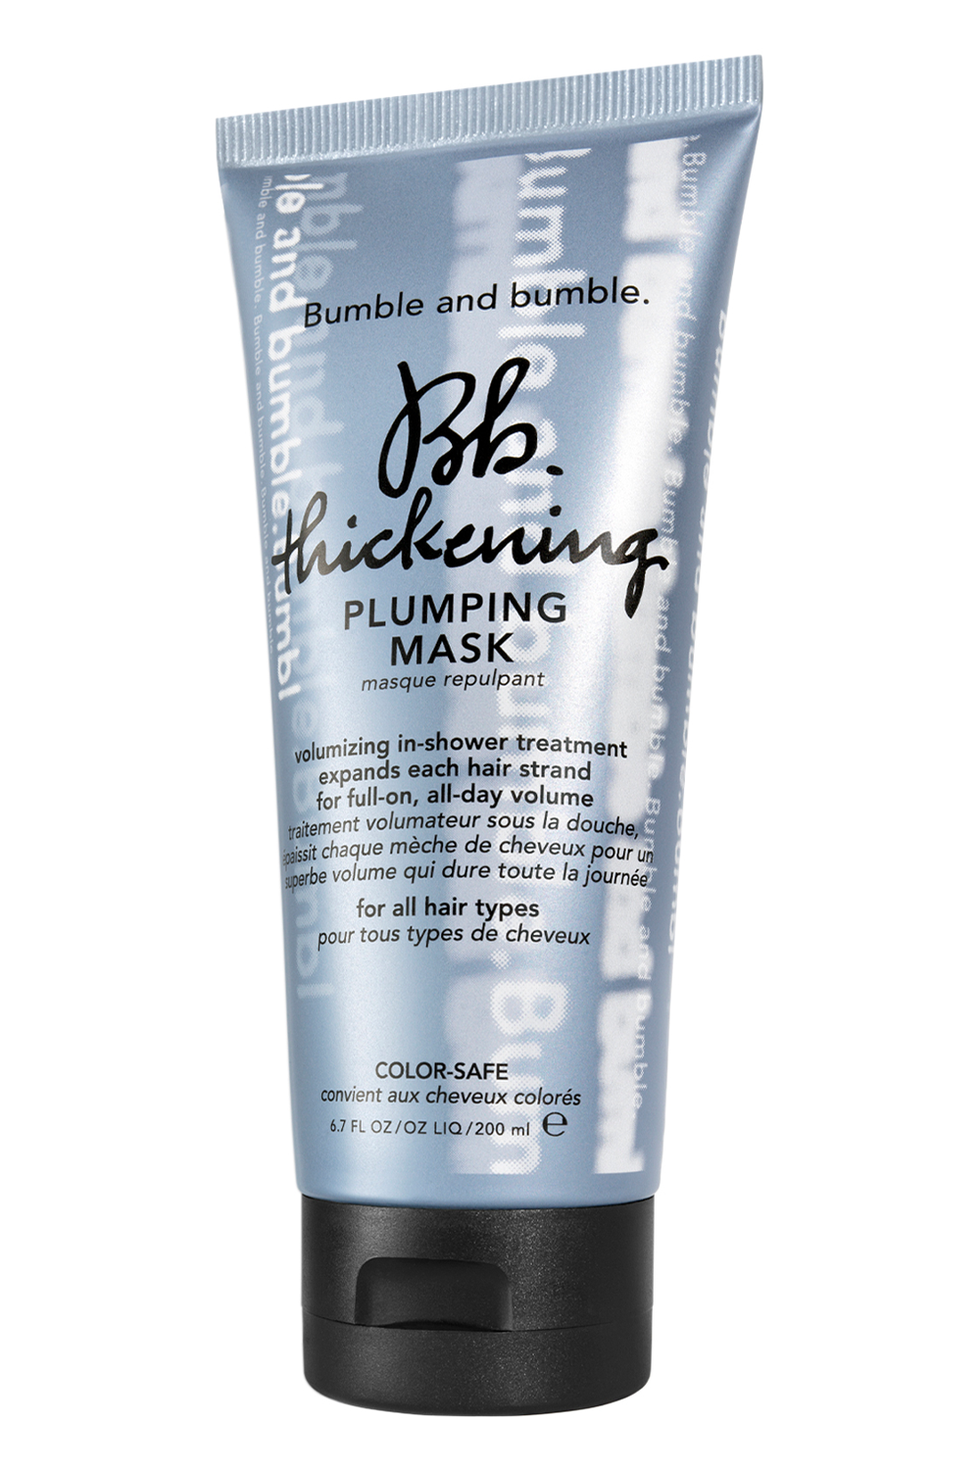 Bumble and Bumble Thickening Plumping Mask